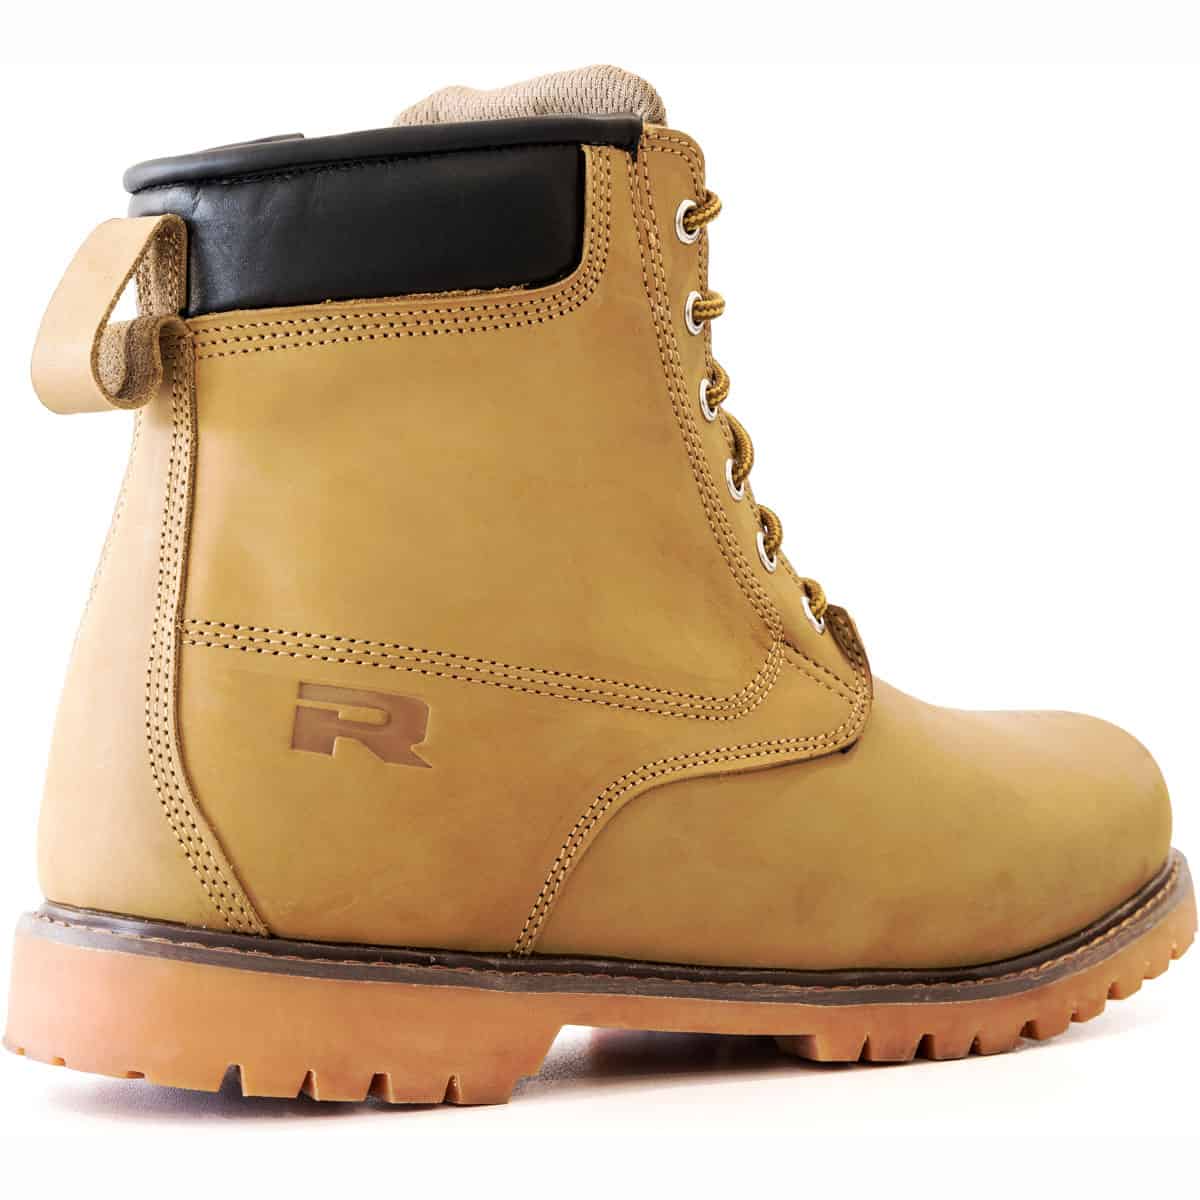 The Richa Calgary Boots are a stylish yet practical choice when it comes to your footwear. They feature a durable 100% leather construction - 45 deg back